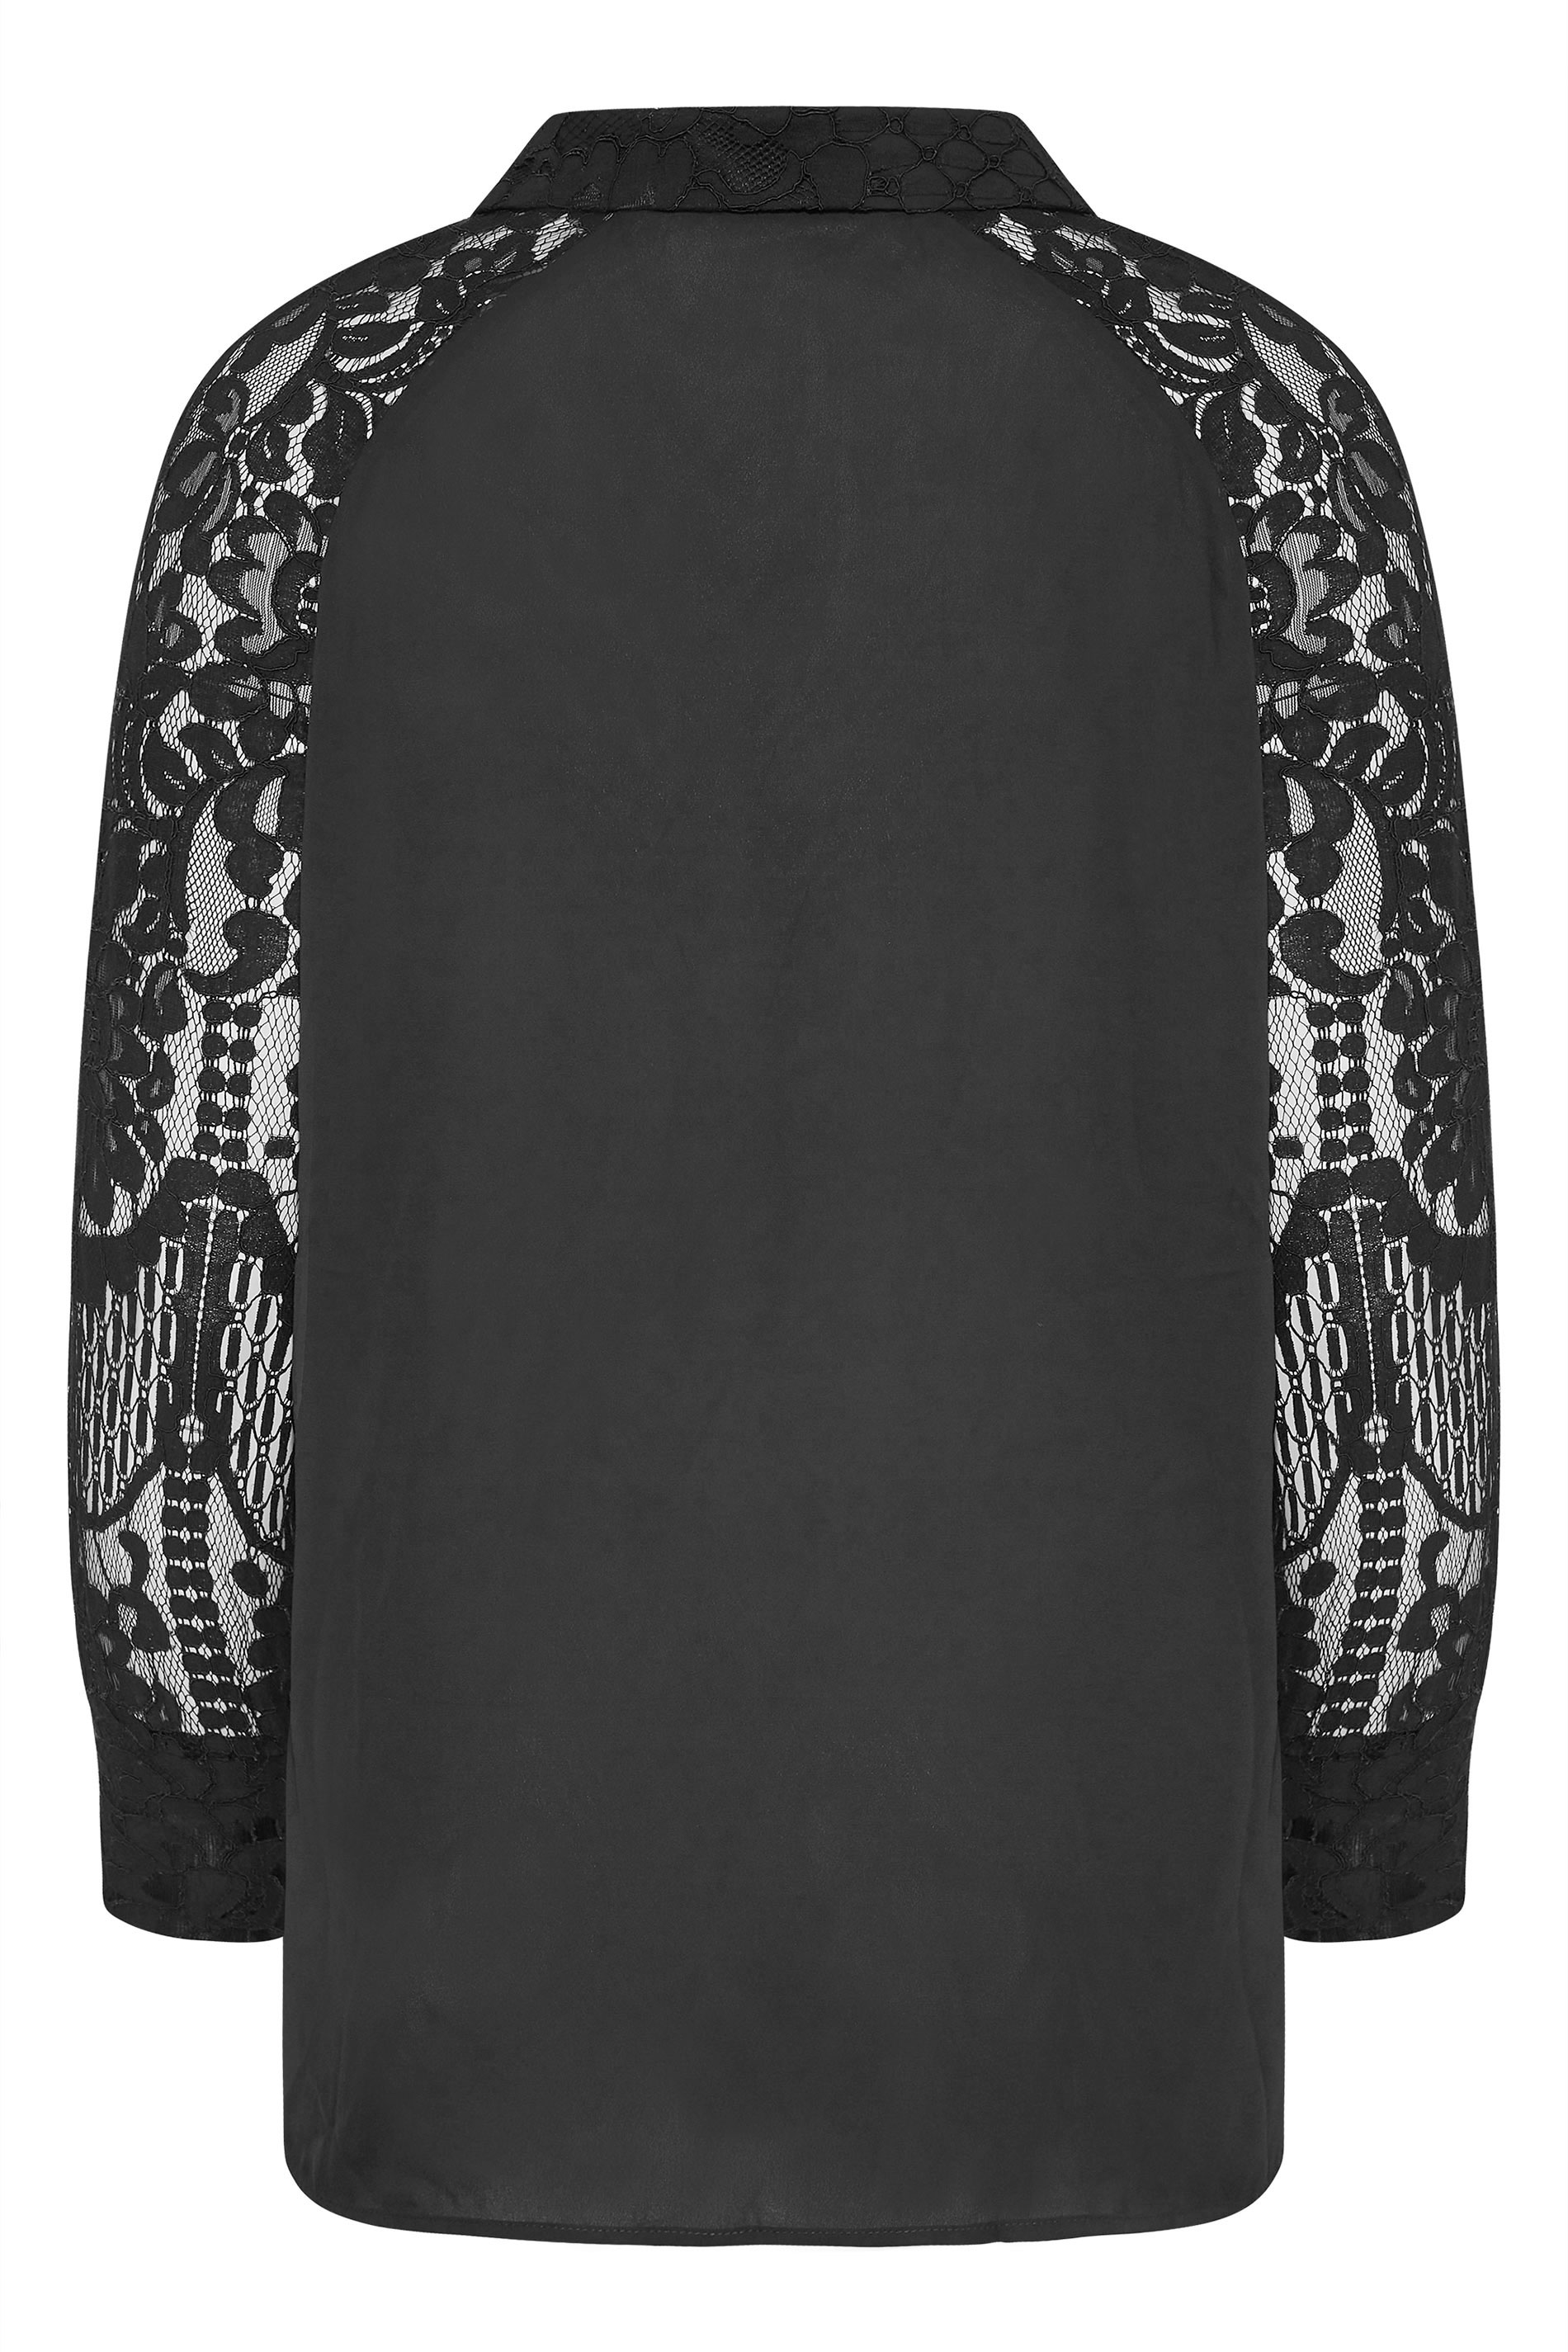 Plus Size YOURS LONDON Black Floral Lace Sleeve Shirt | Yours Clothing